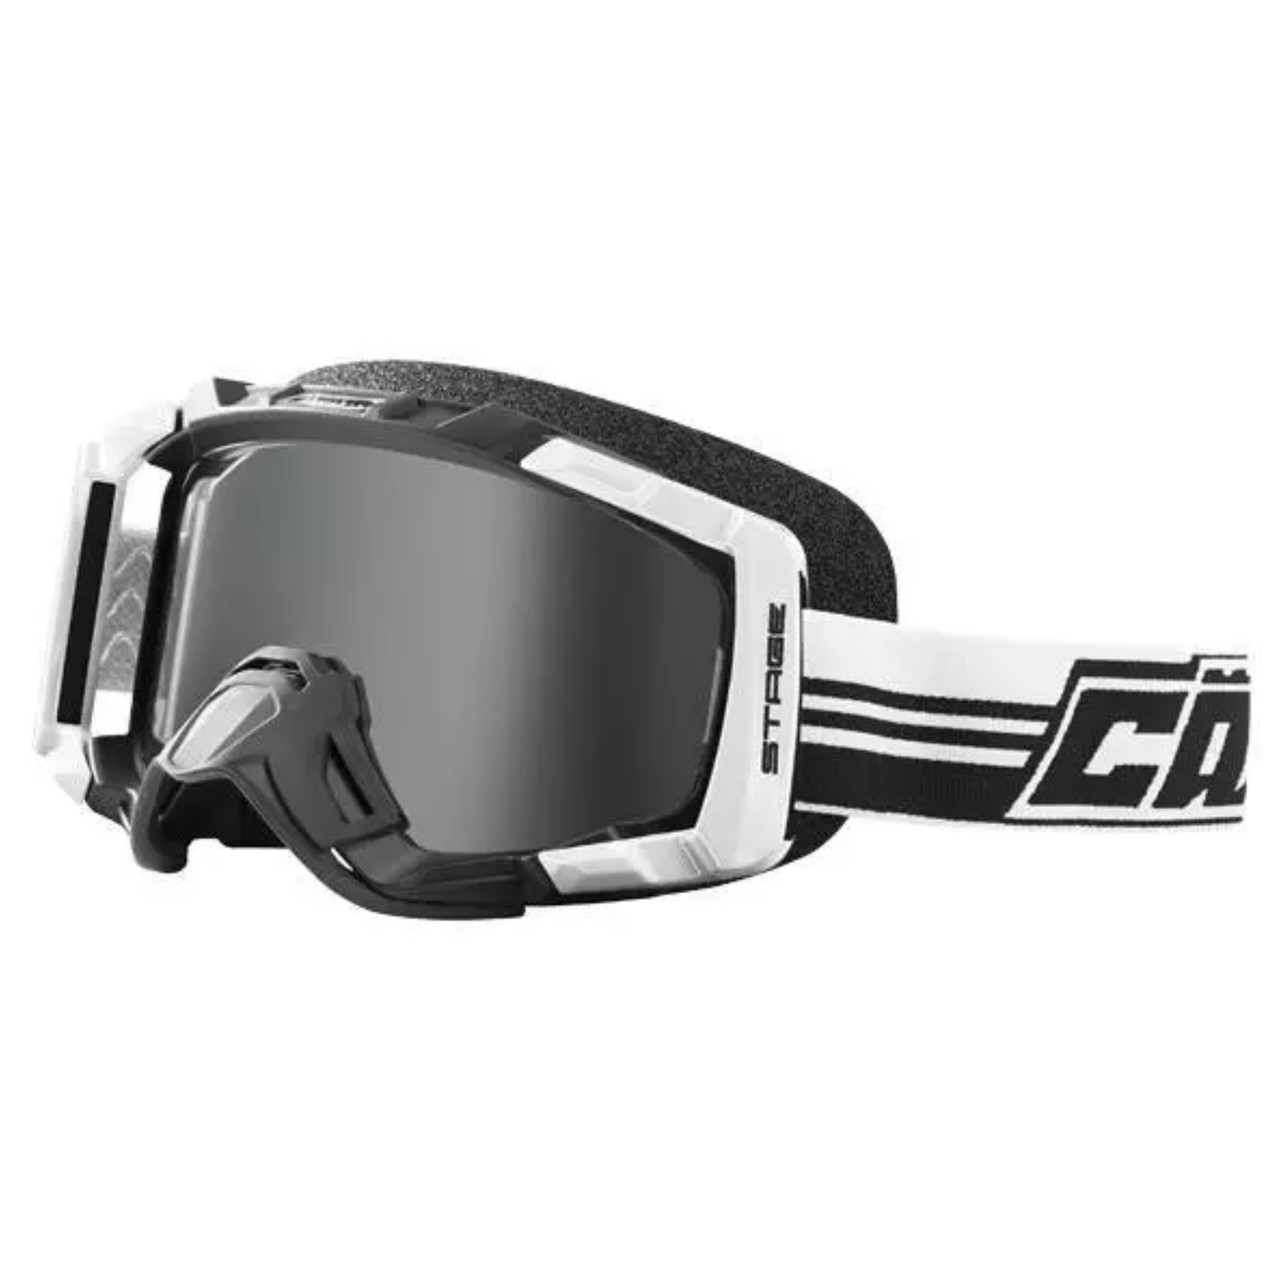 Castle X New Stage Blackout Goggle White, 64-885